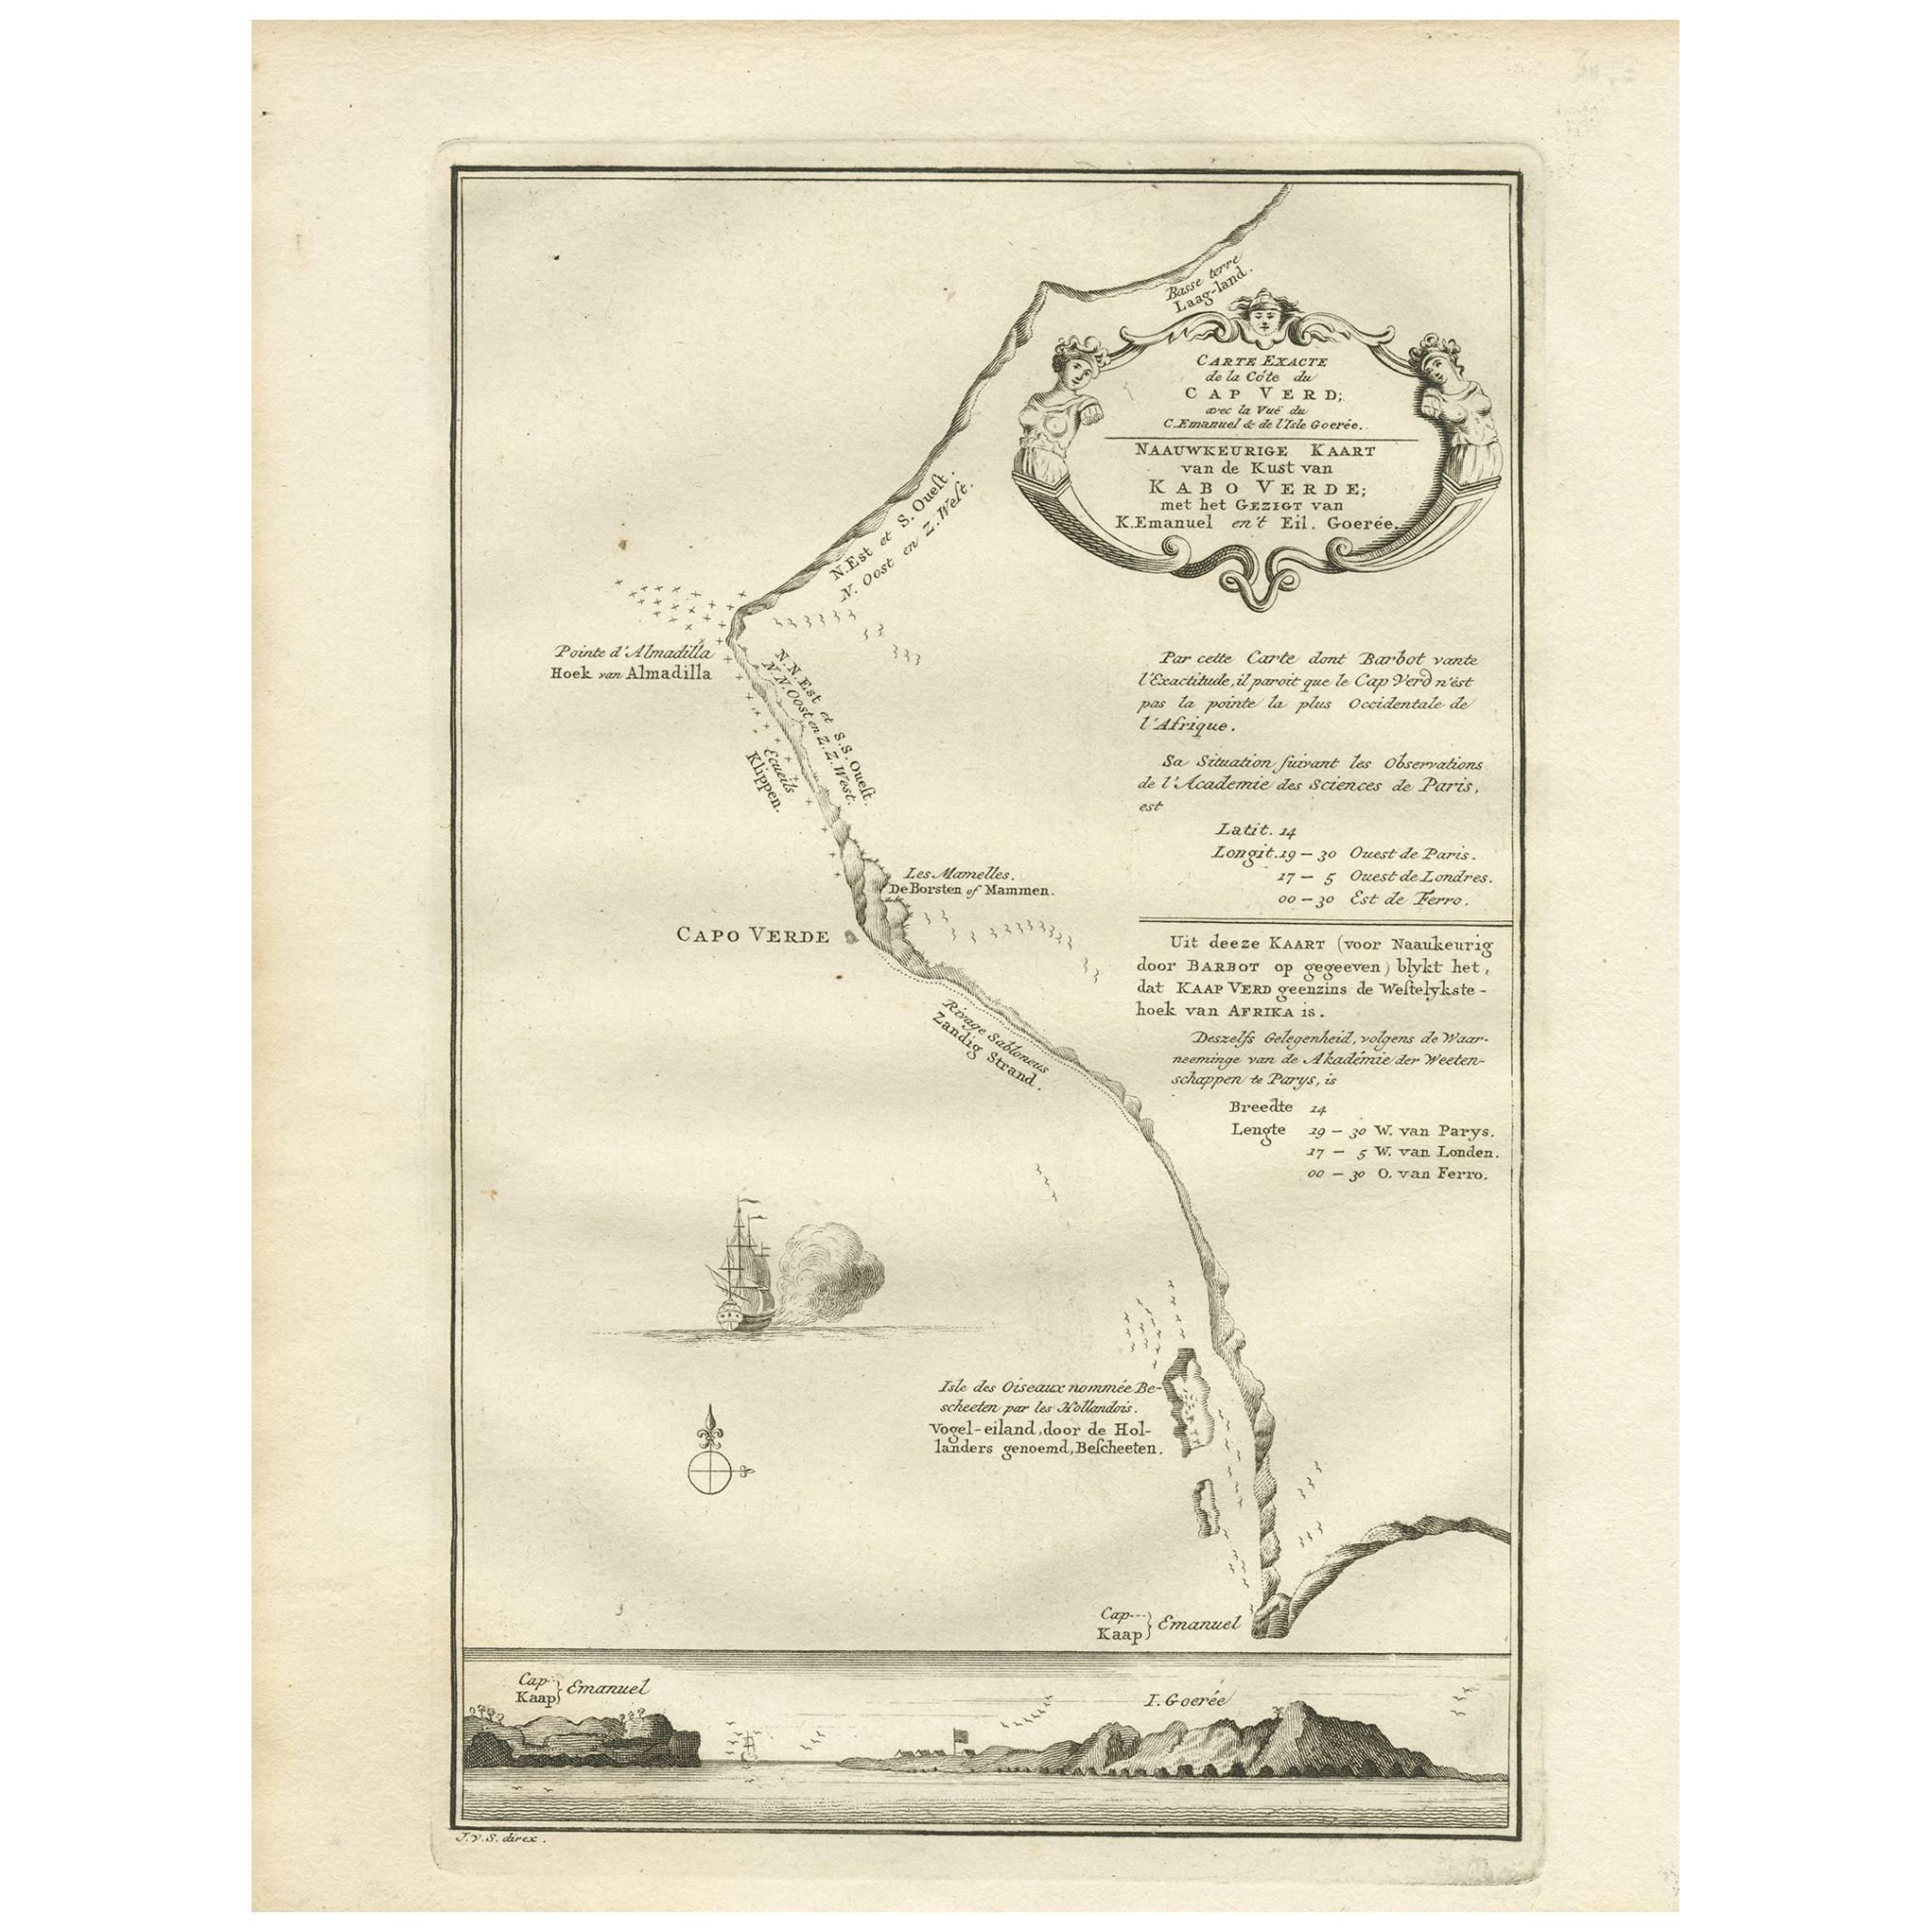 The Antiquities Map of the Coast of Cape Verde by J. Van Der Schley, circa 1750